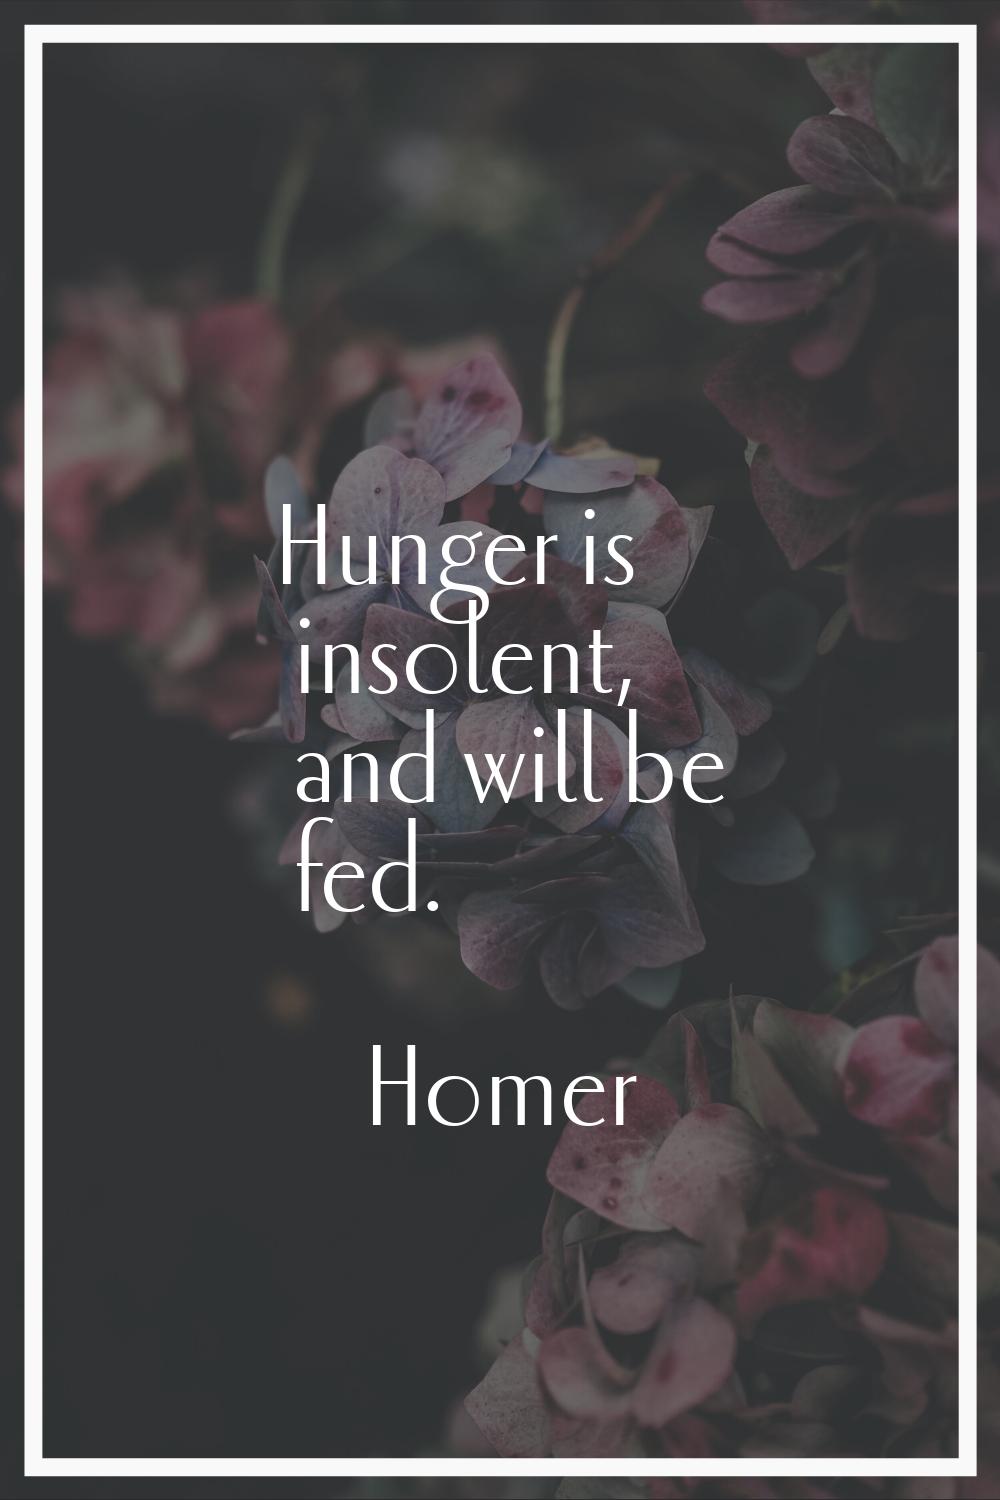 Hunger is insolent, and will be fed.